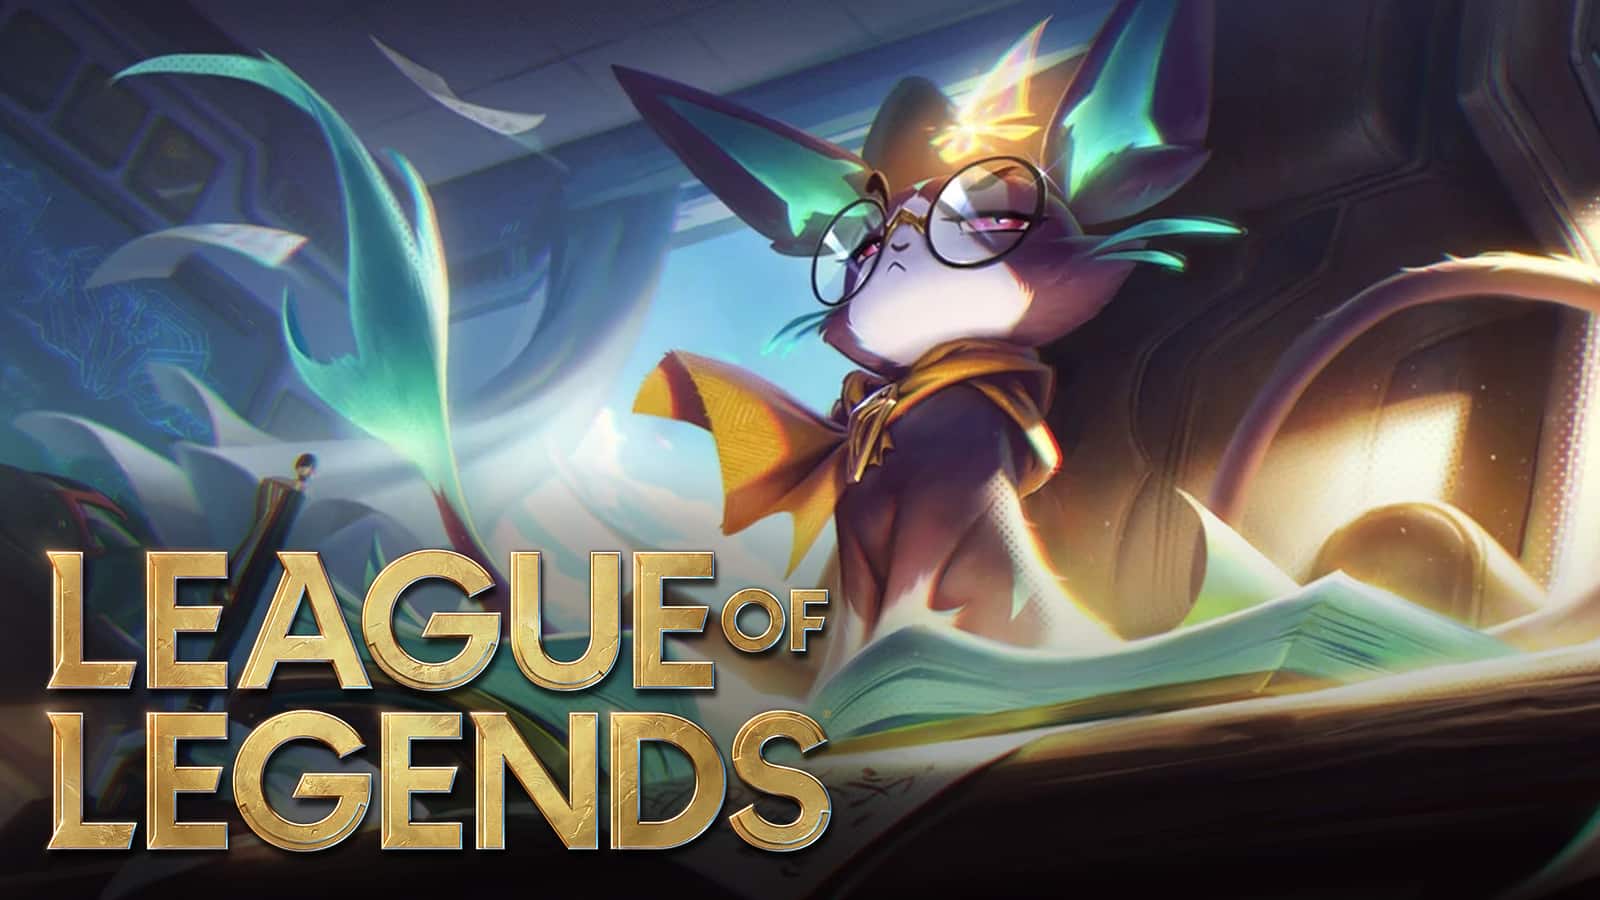 Yuumi standing on a book in League of Legends